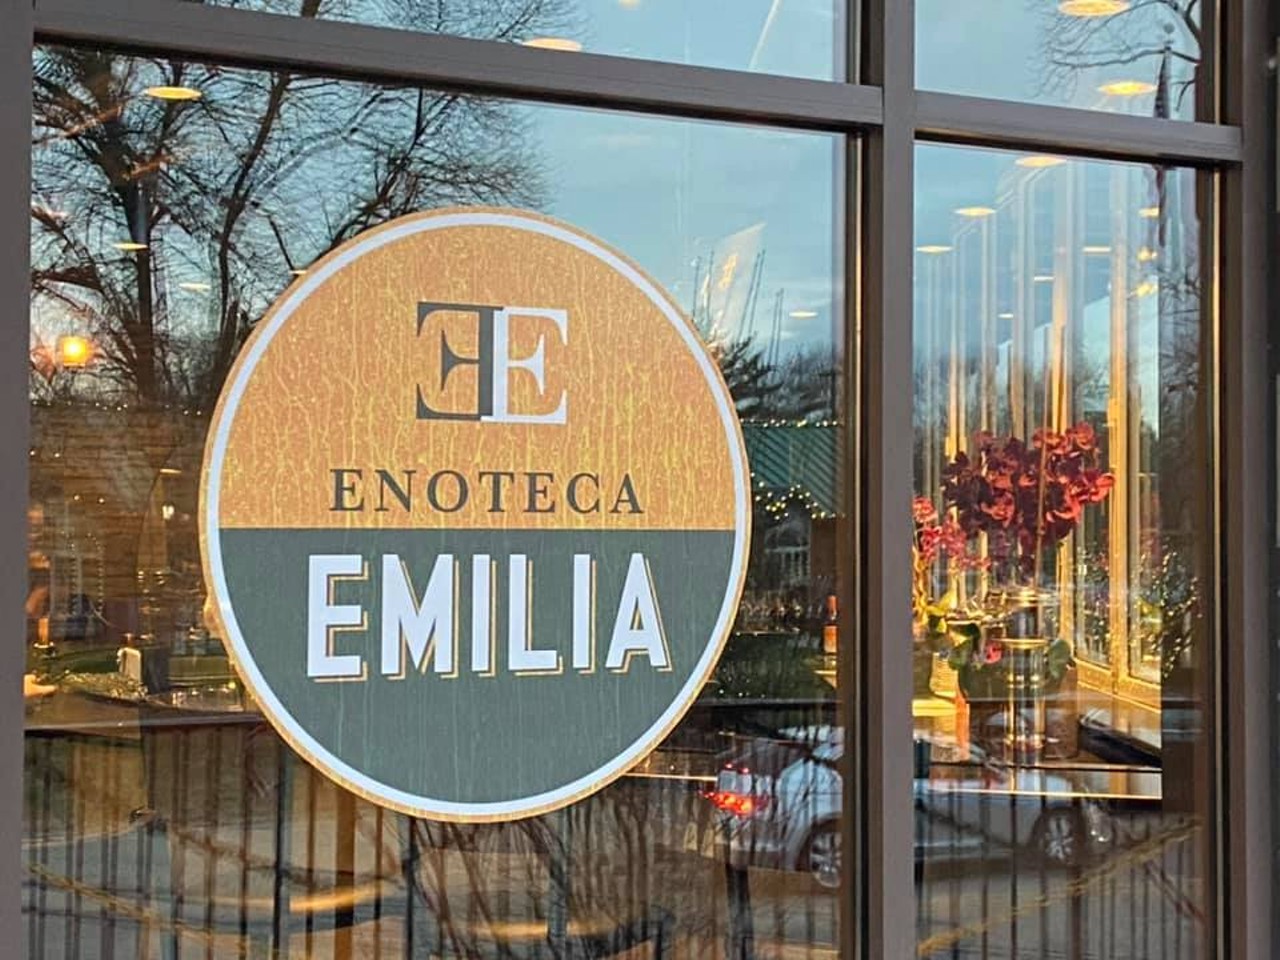 23. Enoteca Emilia (Permanently Closed)
110 S. Second St., Loveland
"We were greeted by none other than the beautiful owner - and the food + bartender (Cory) + server (Porter) were absolutely flawless! Kudos to the kitchen- every bite was delicious and unique especially the veal meatballs!!! Awesome atmosphere and service!" — Tami W.